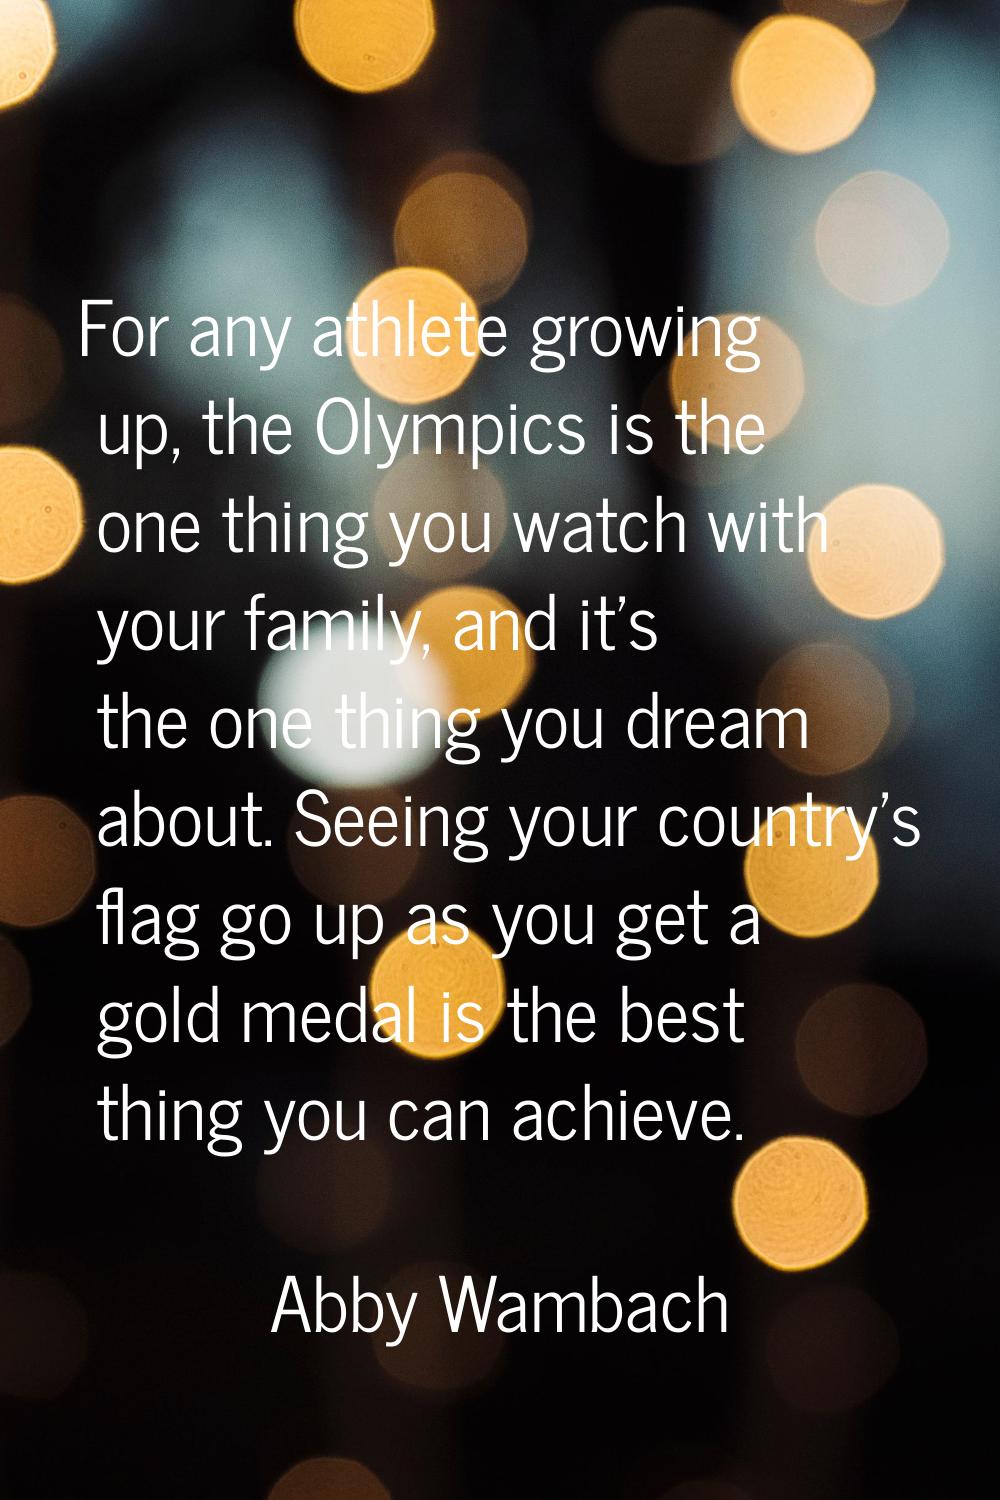 For any athlete growing up, the Olympics is the one thing you watch with your family, and it's the 